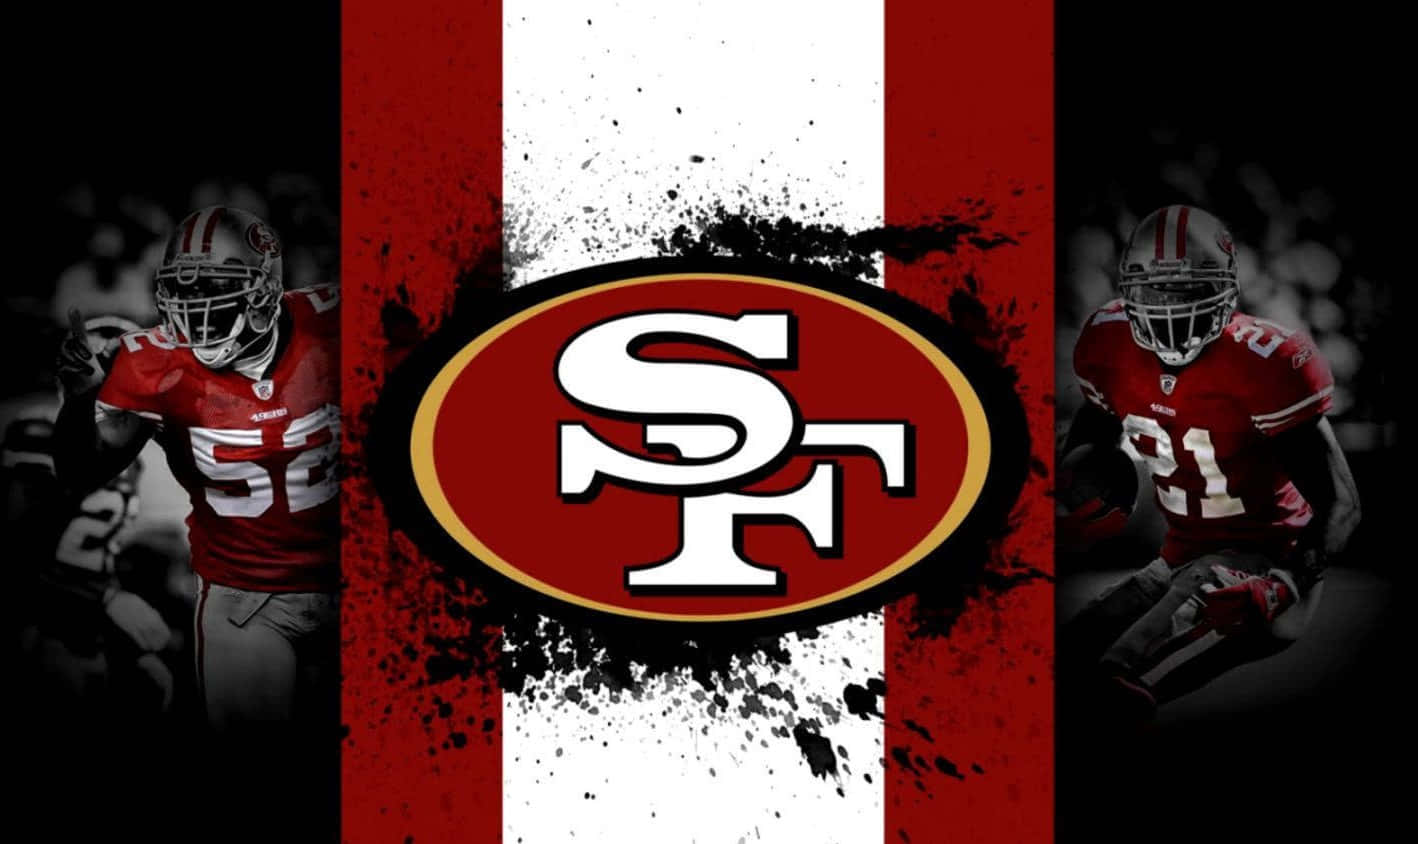 "San Francisco 49ers Red and Gold Pride"